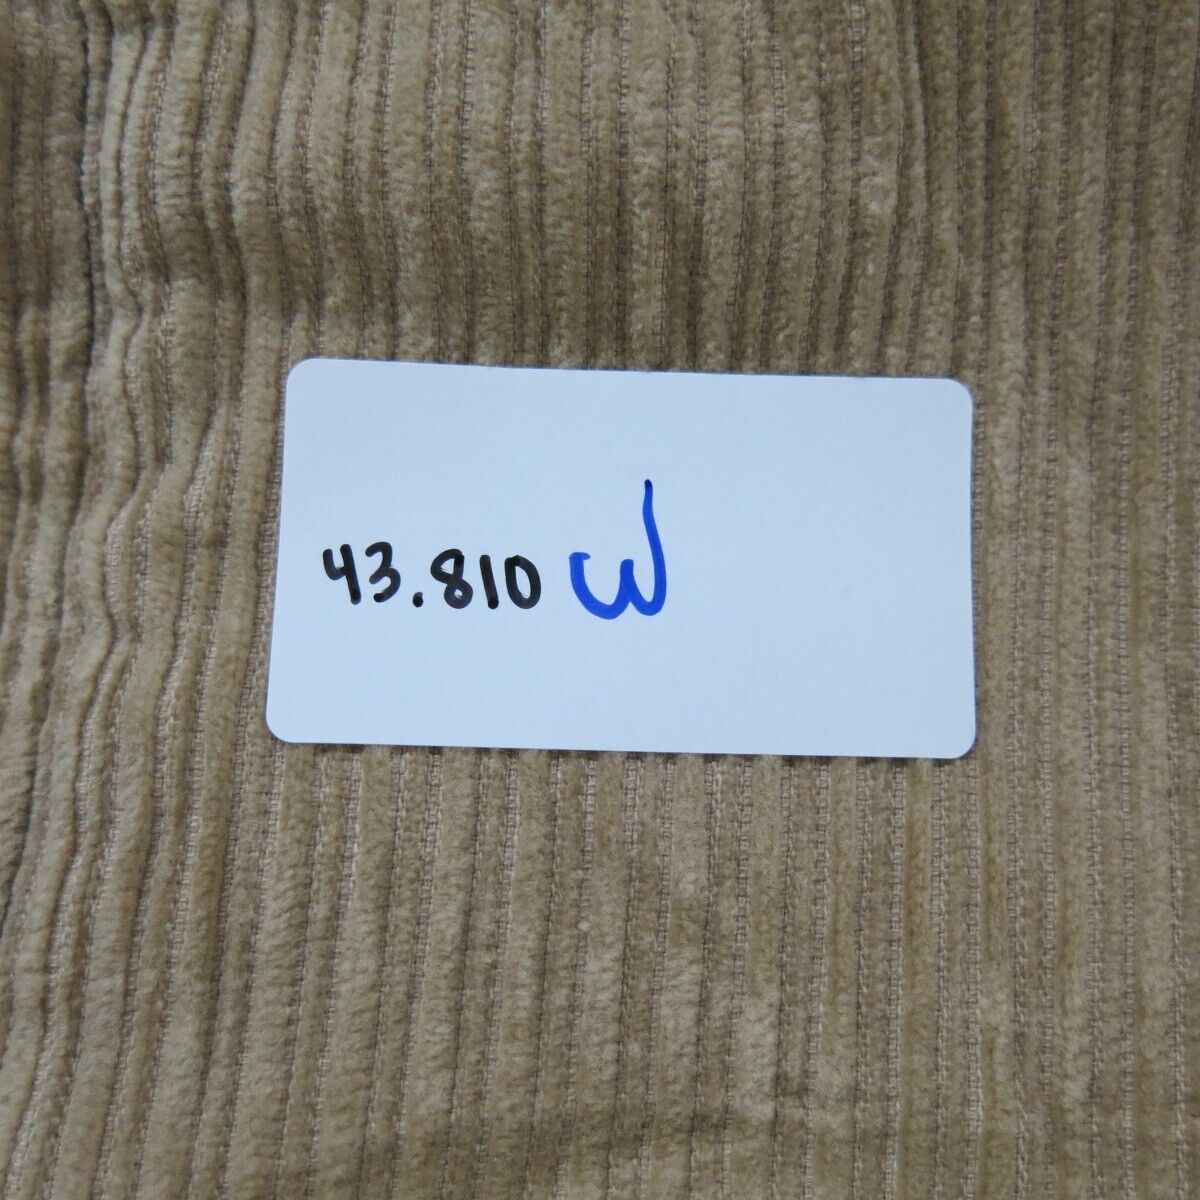 Cotton Woven Label with 4 lines of text